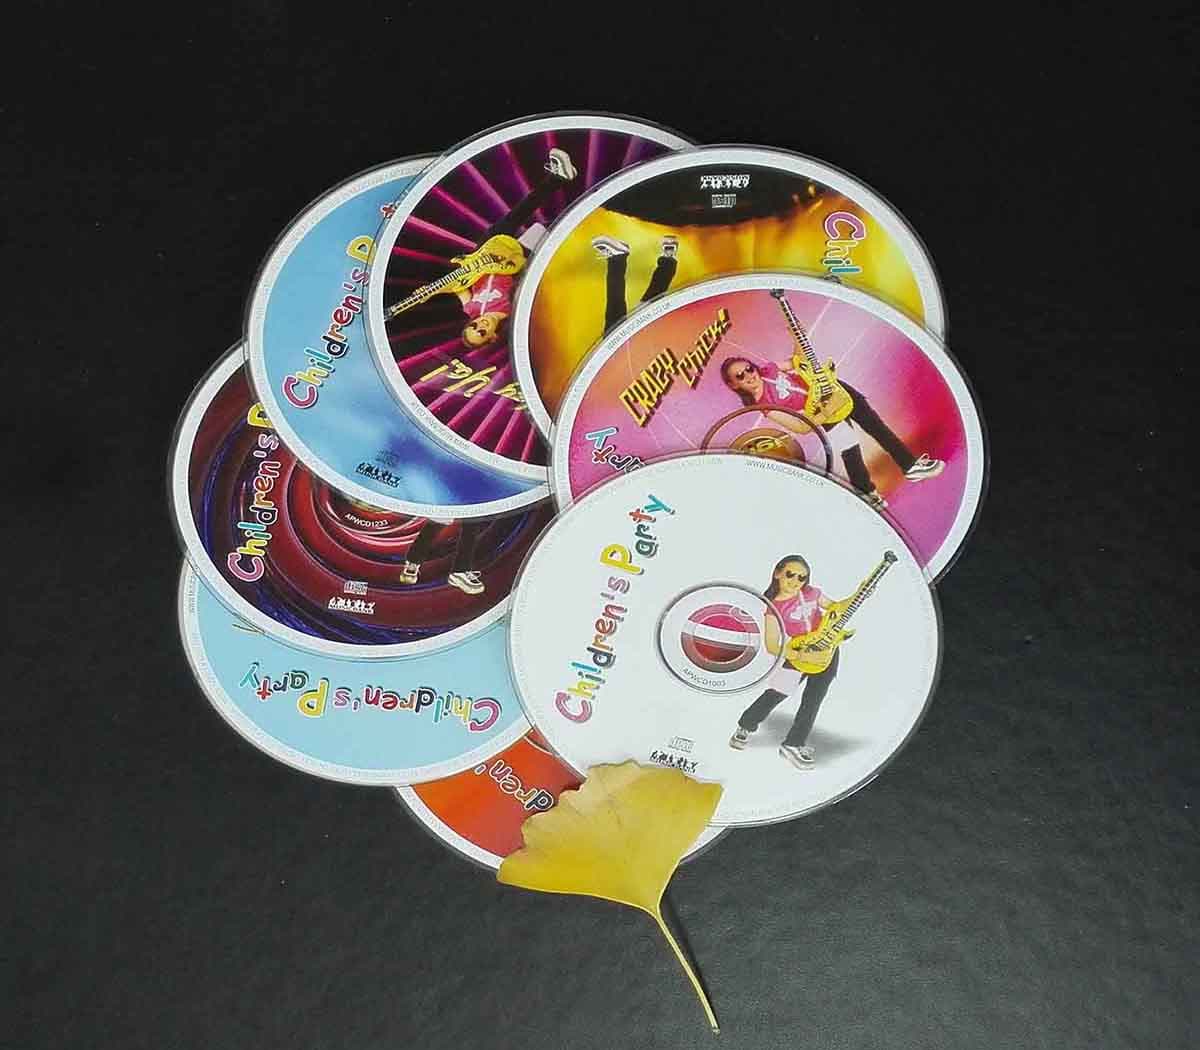 Bulk muisc cd replicaiton with full color printing